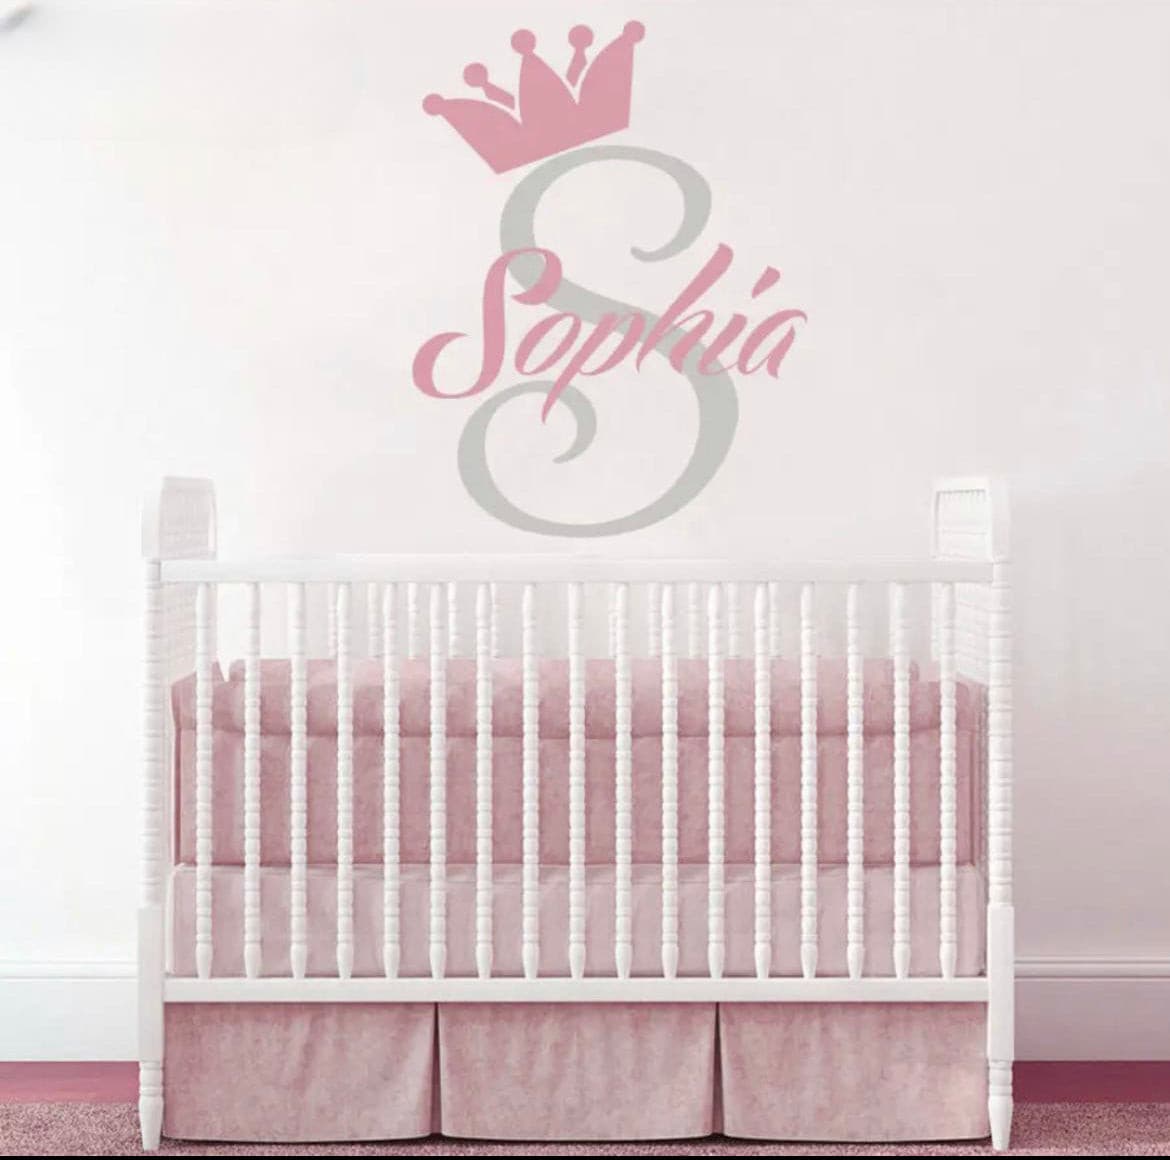 Personalised Nursery Wall Decals - Princess Girl Capital Letter + Name.